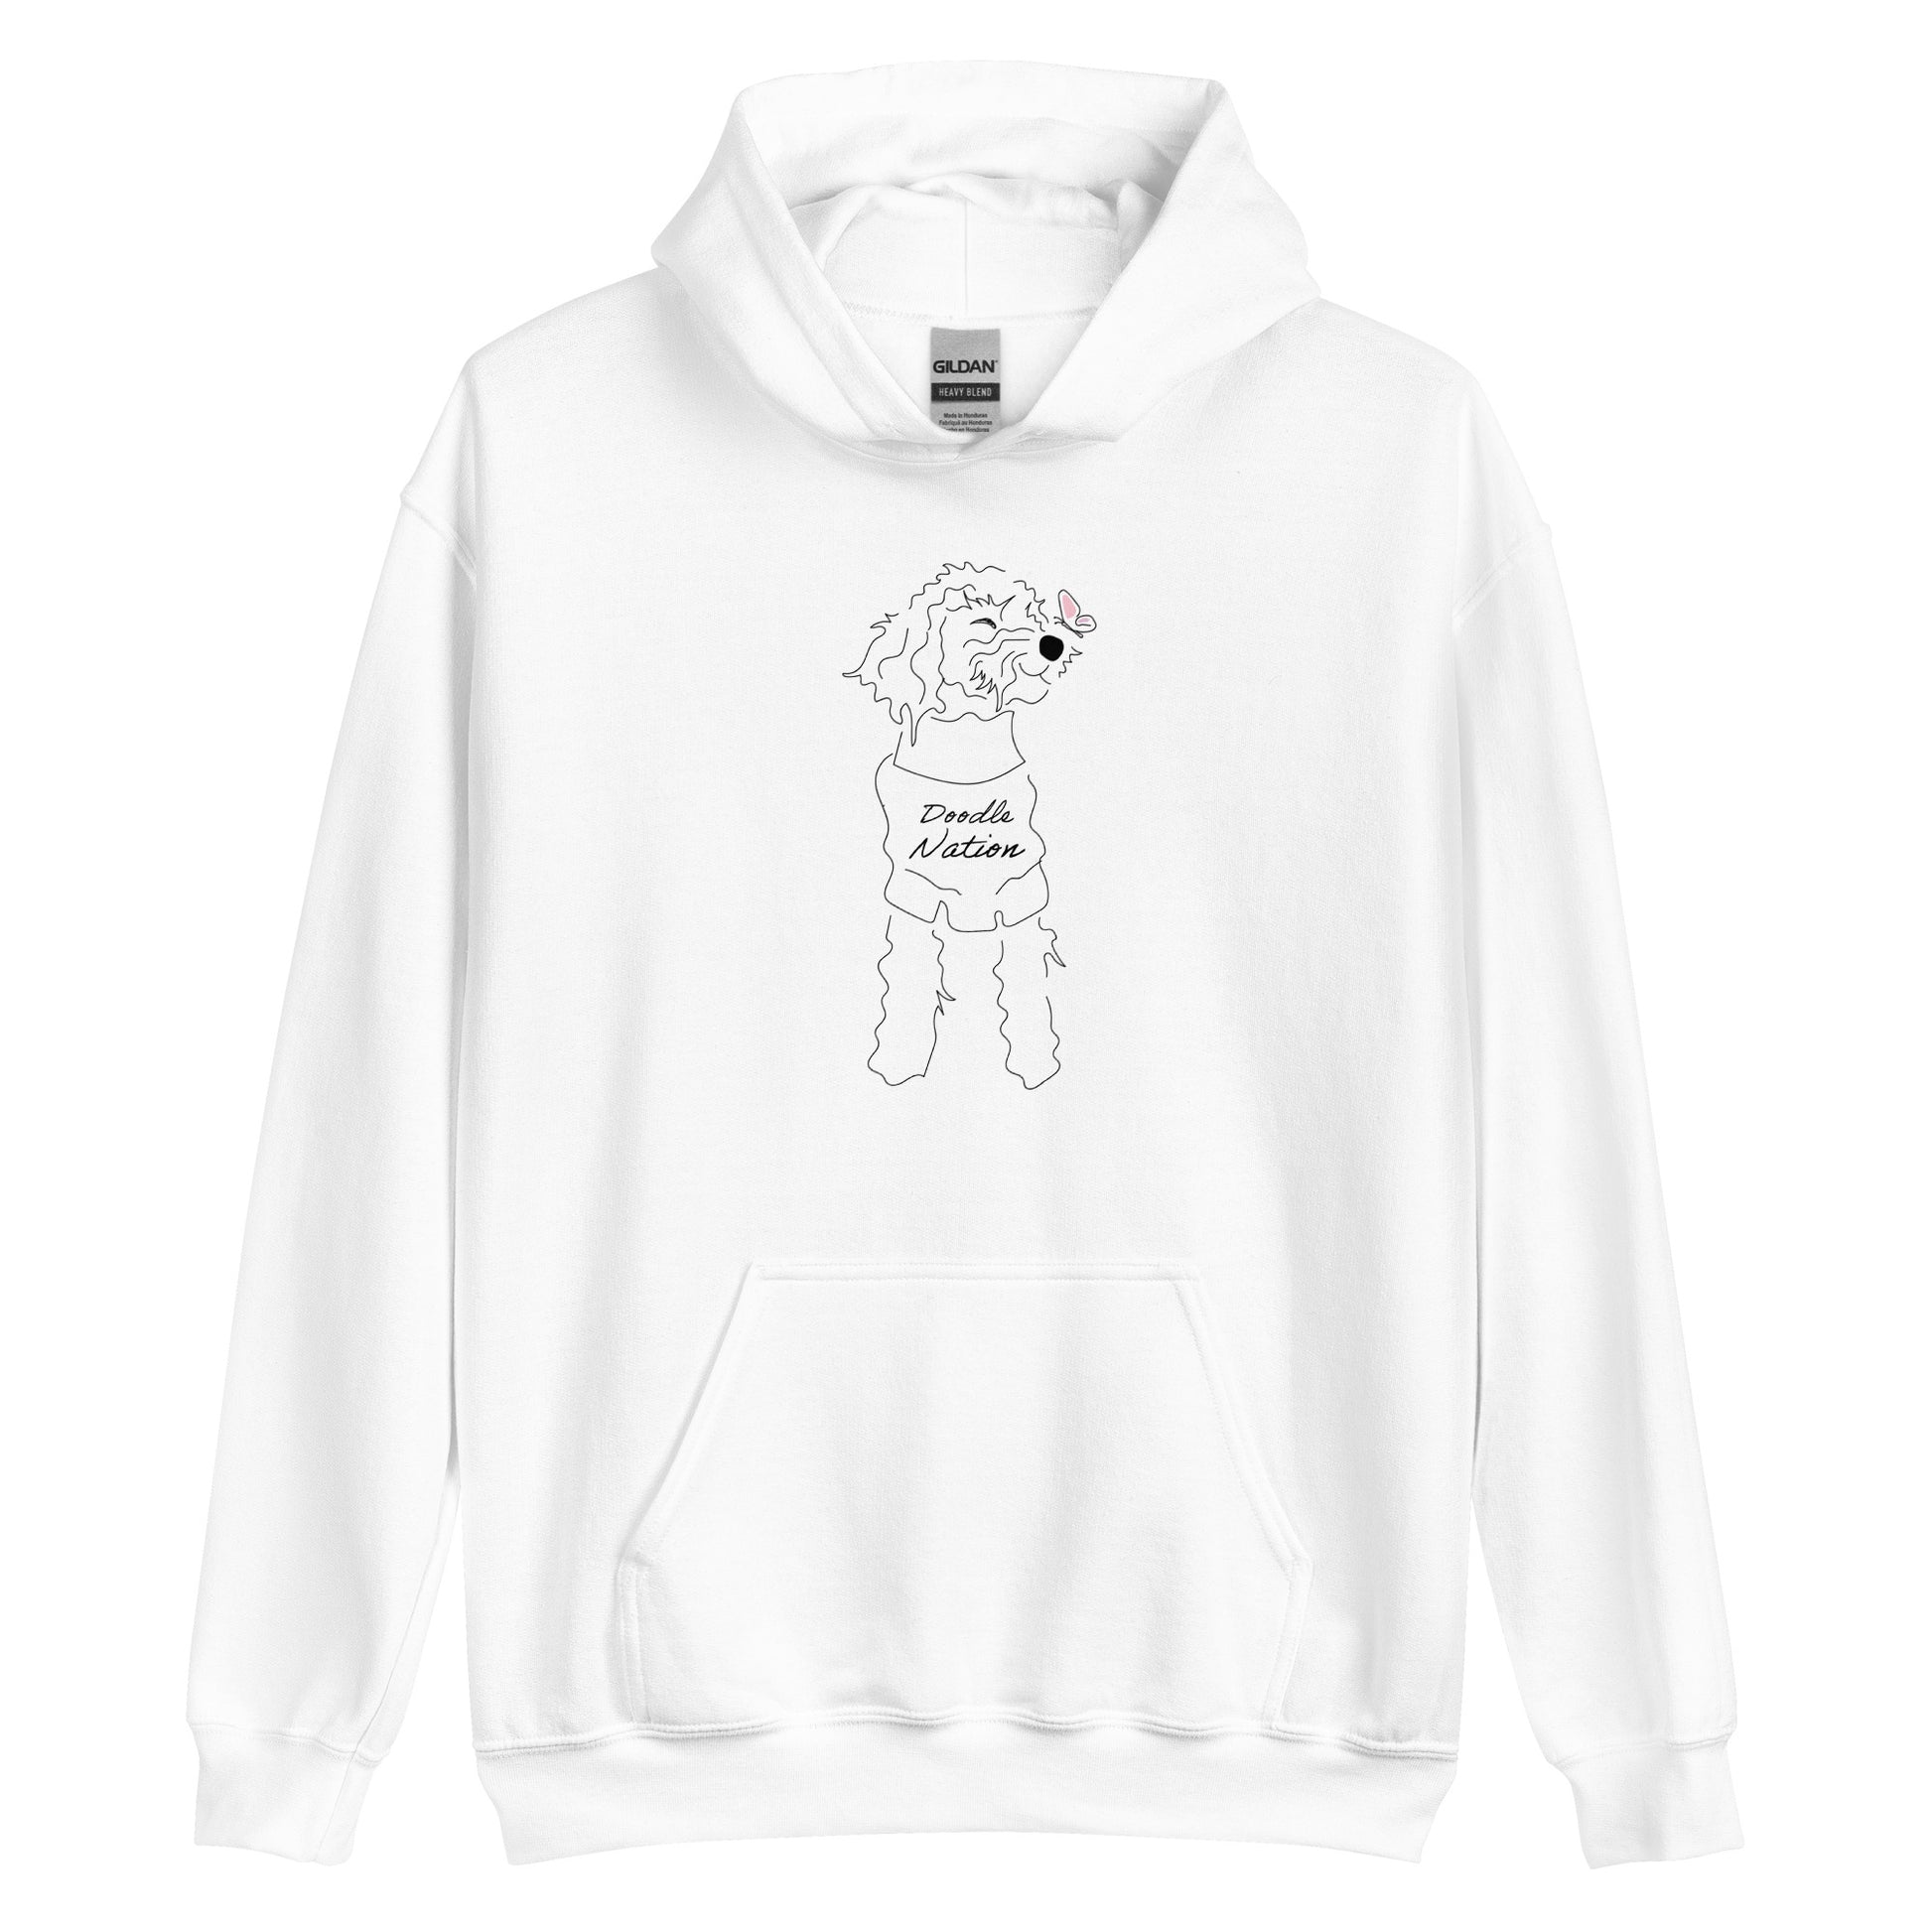 Goldendoodle hoodie with Goldendoodle dog face and words "Doodle Nation" in white color